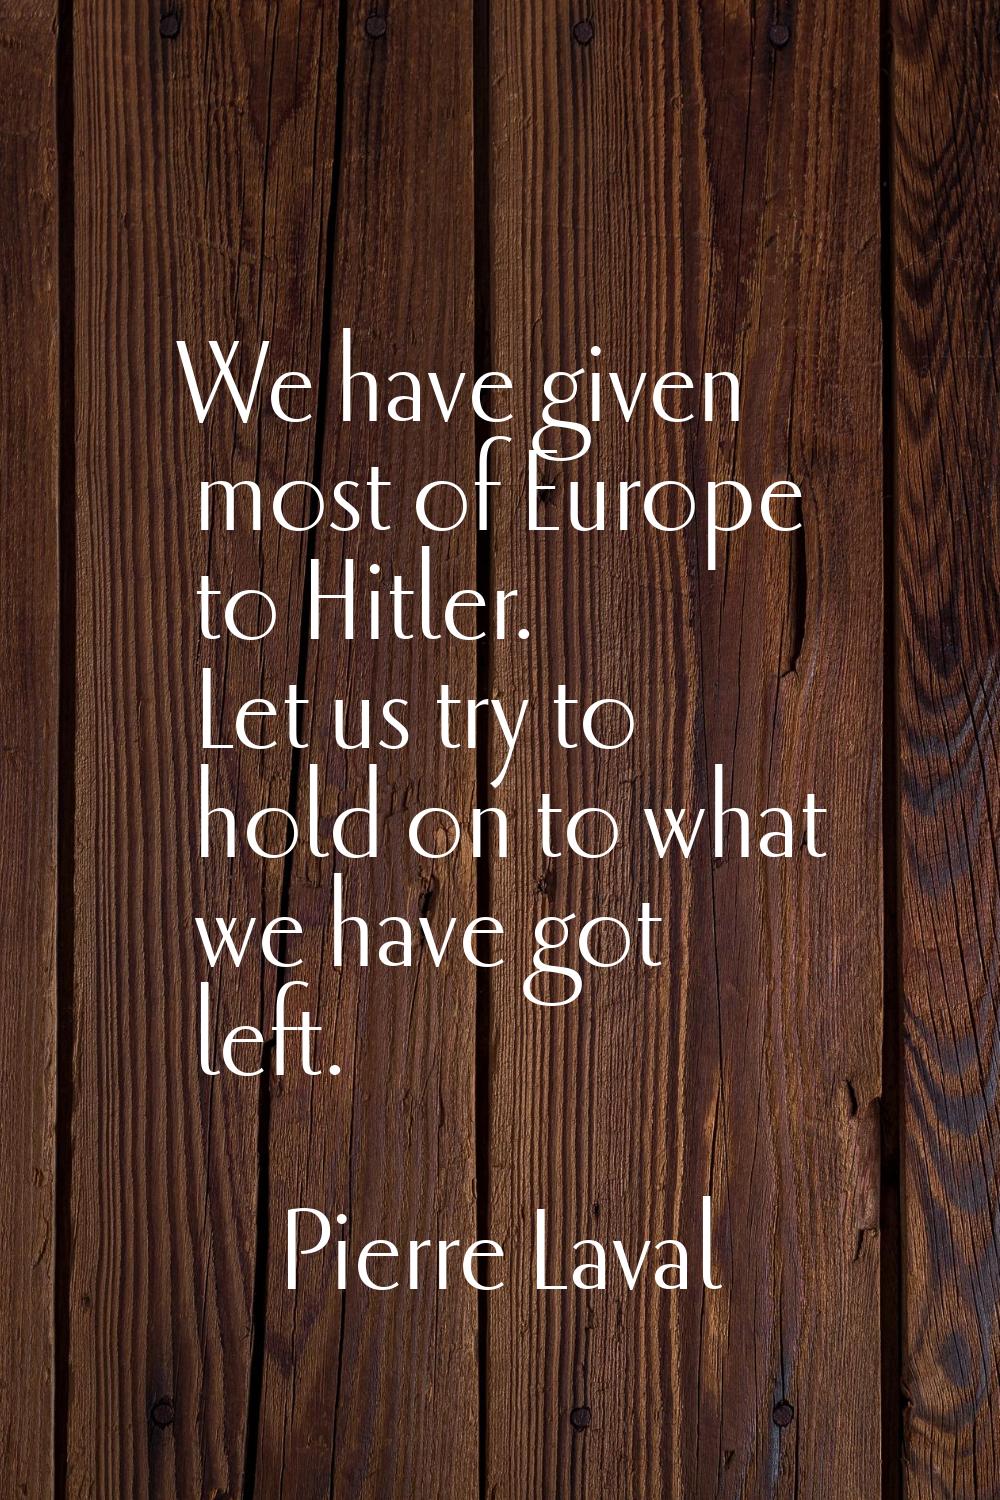 We have given most of Europe to Hitler. Let us try to hold on to what we have got left.